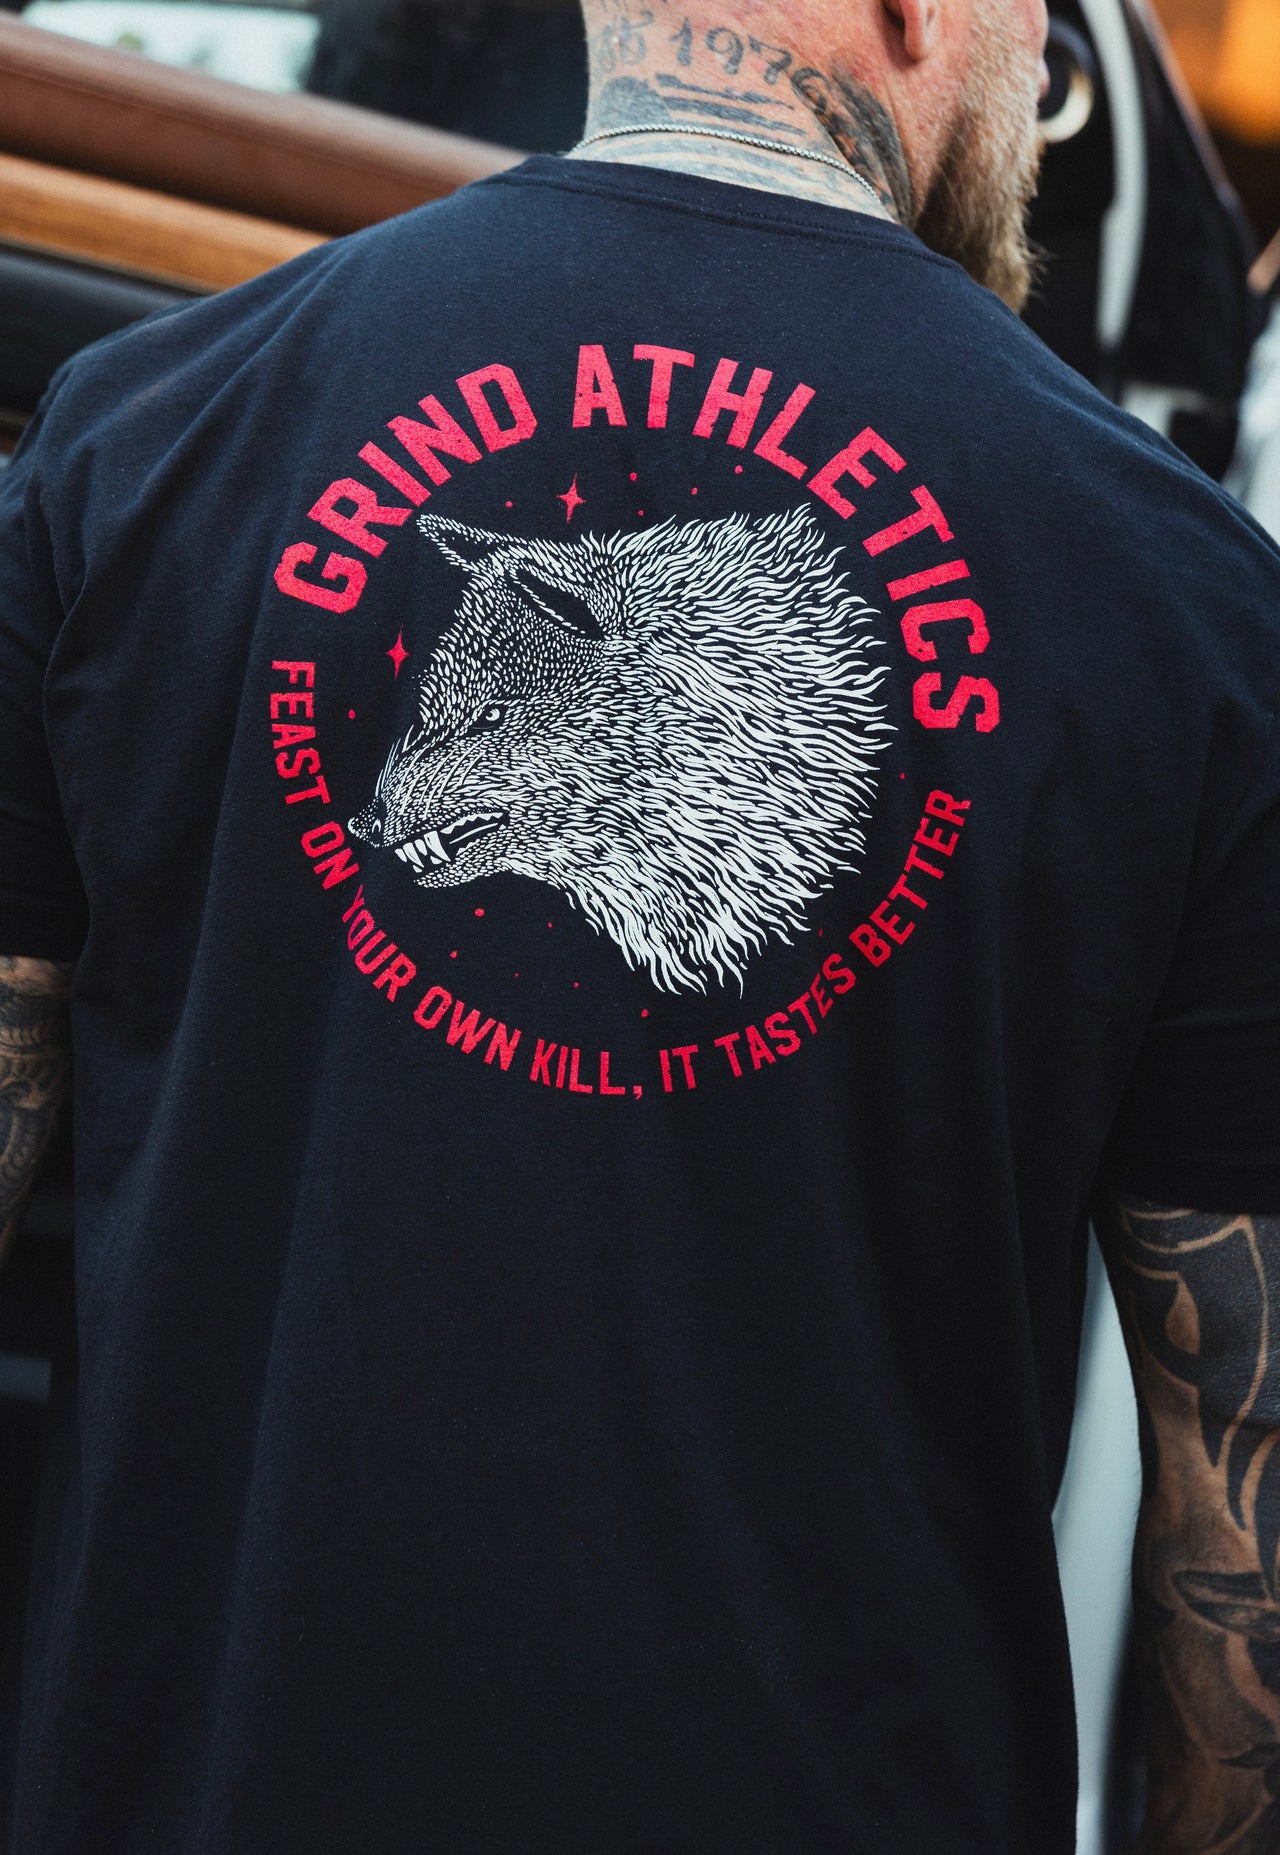 The Grind Athletics Graphic T-Shirt Feast Tee